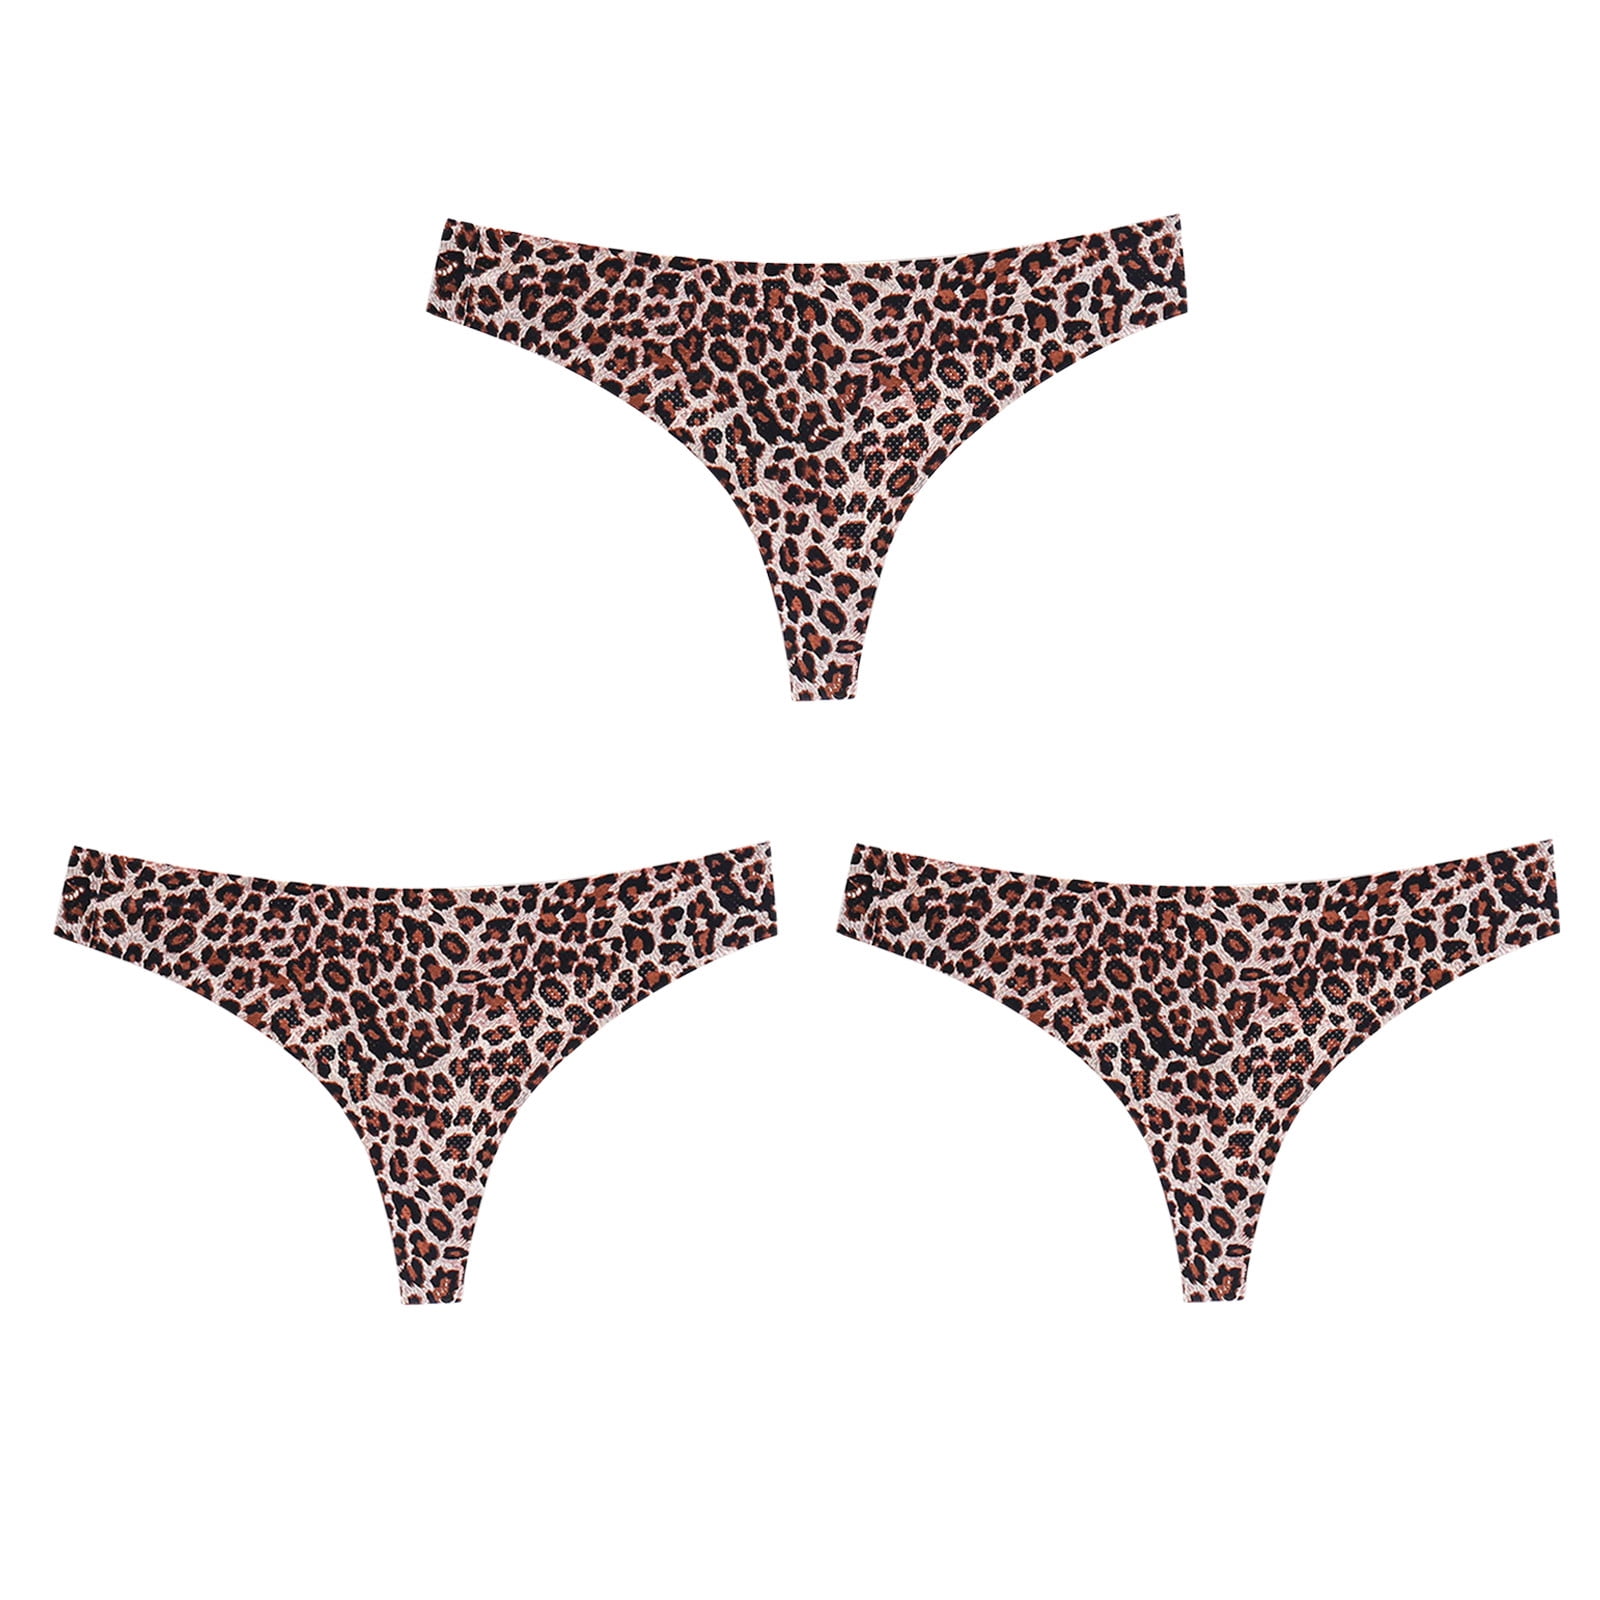 Buy Tilottama High Waisted Cotton Underwear for Women Plus Size Full  Coverage Panty Soft Stretch Ladies Panties Leopard Print Free Size (32 Till  38) Pack of 2 Assorted at